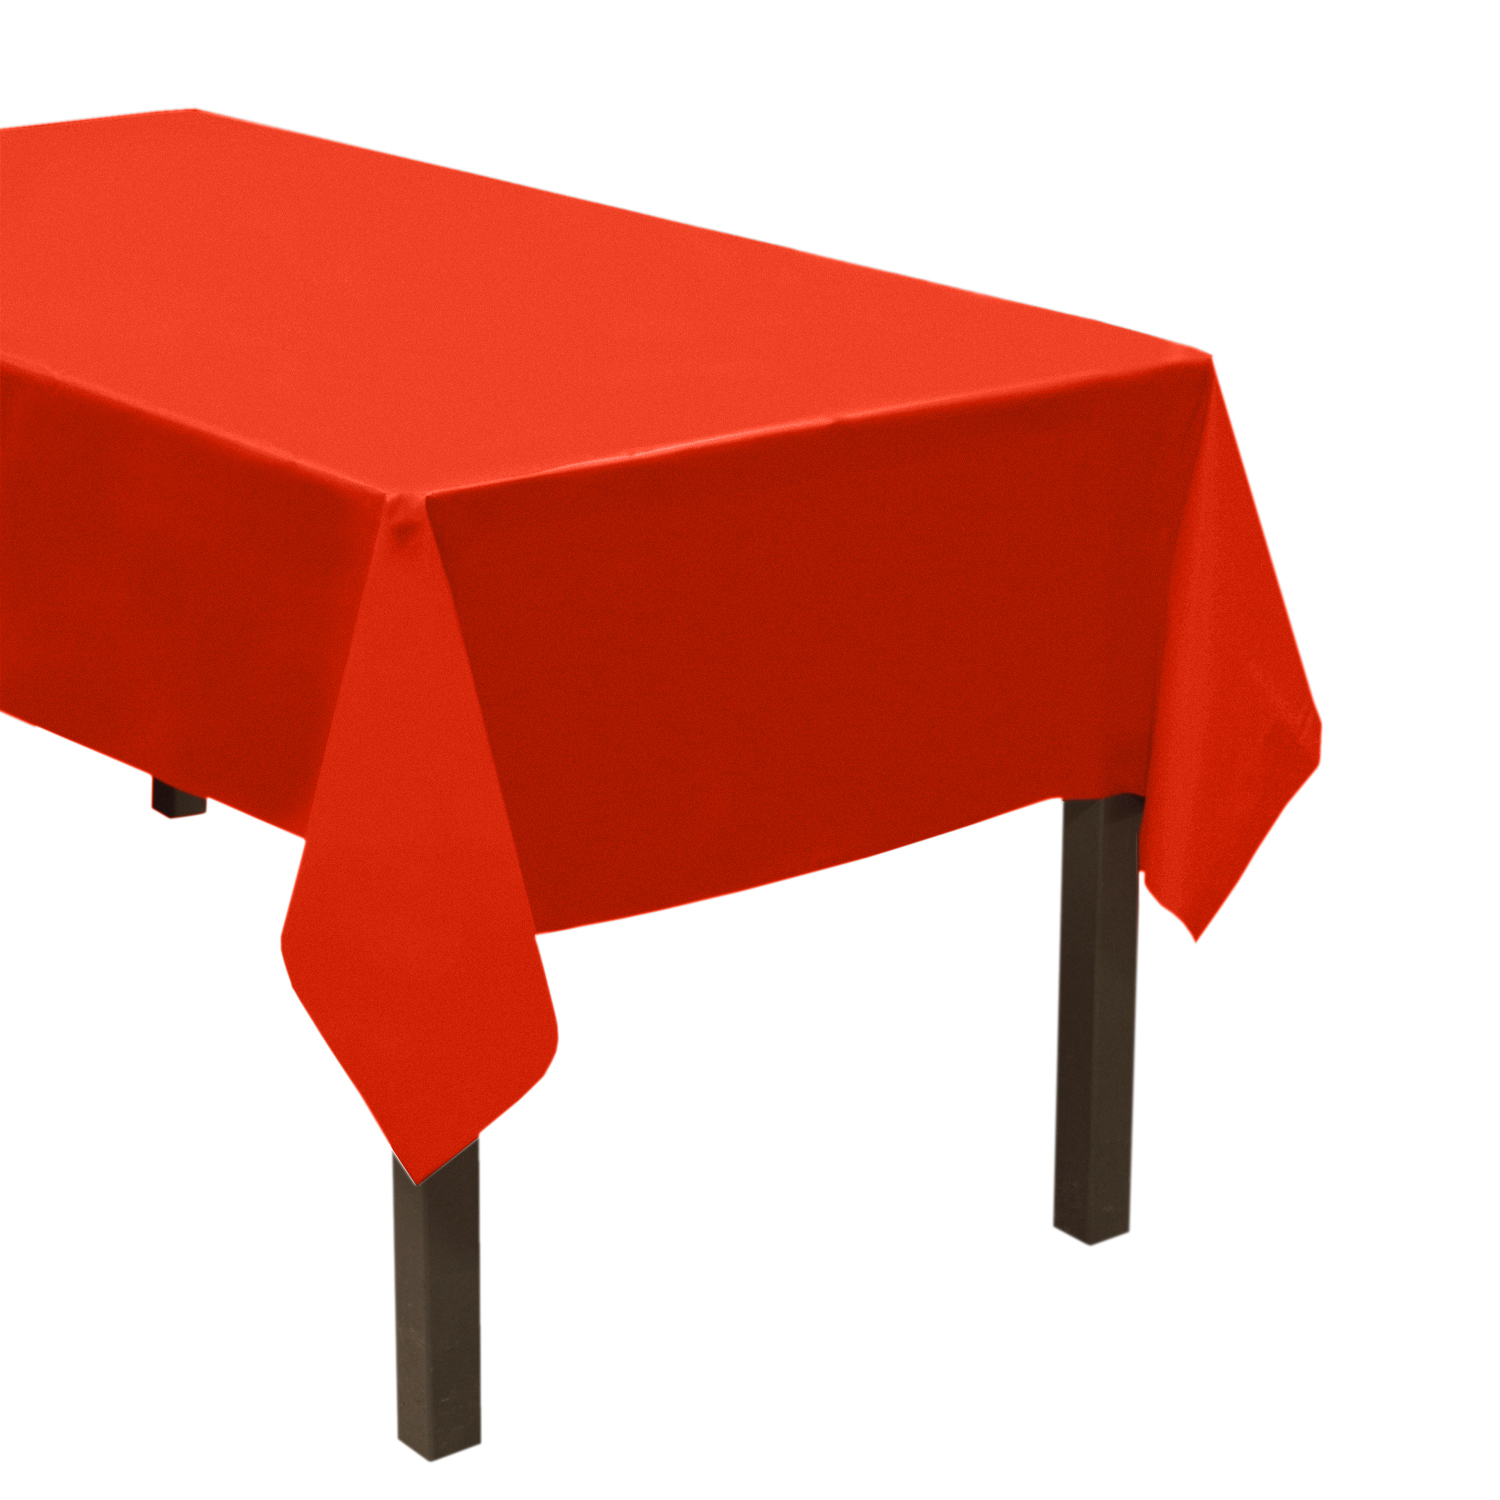 Rectangular Table Covers